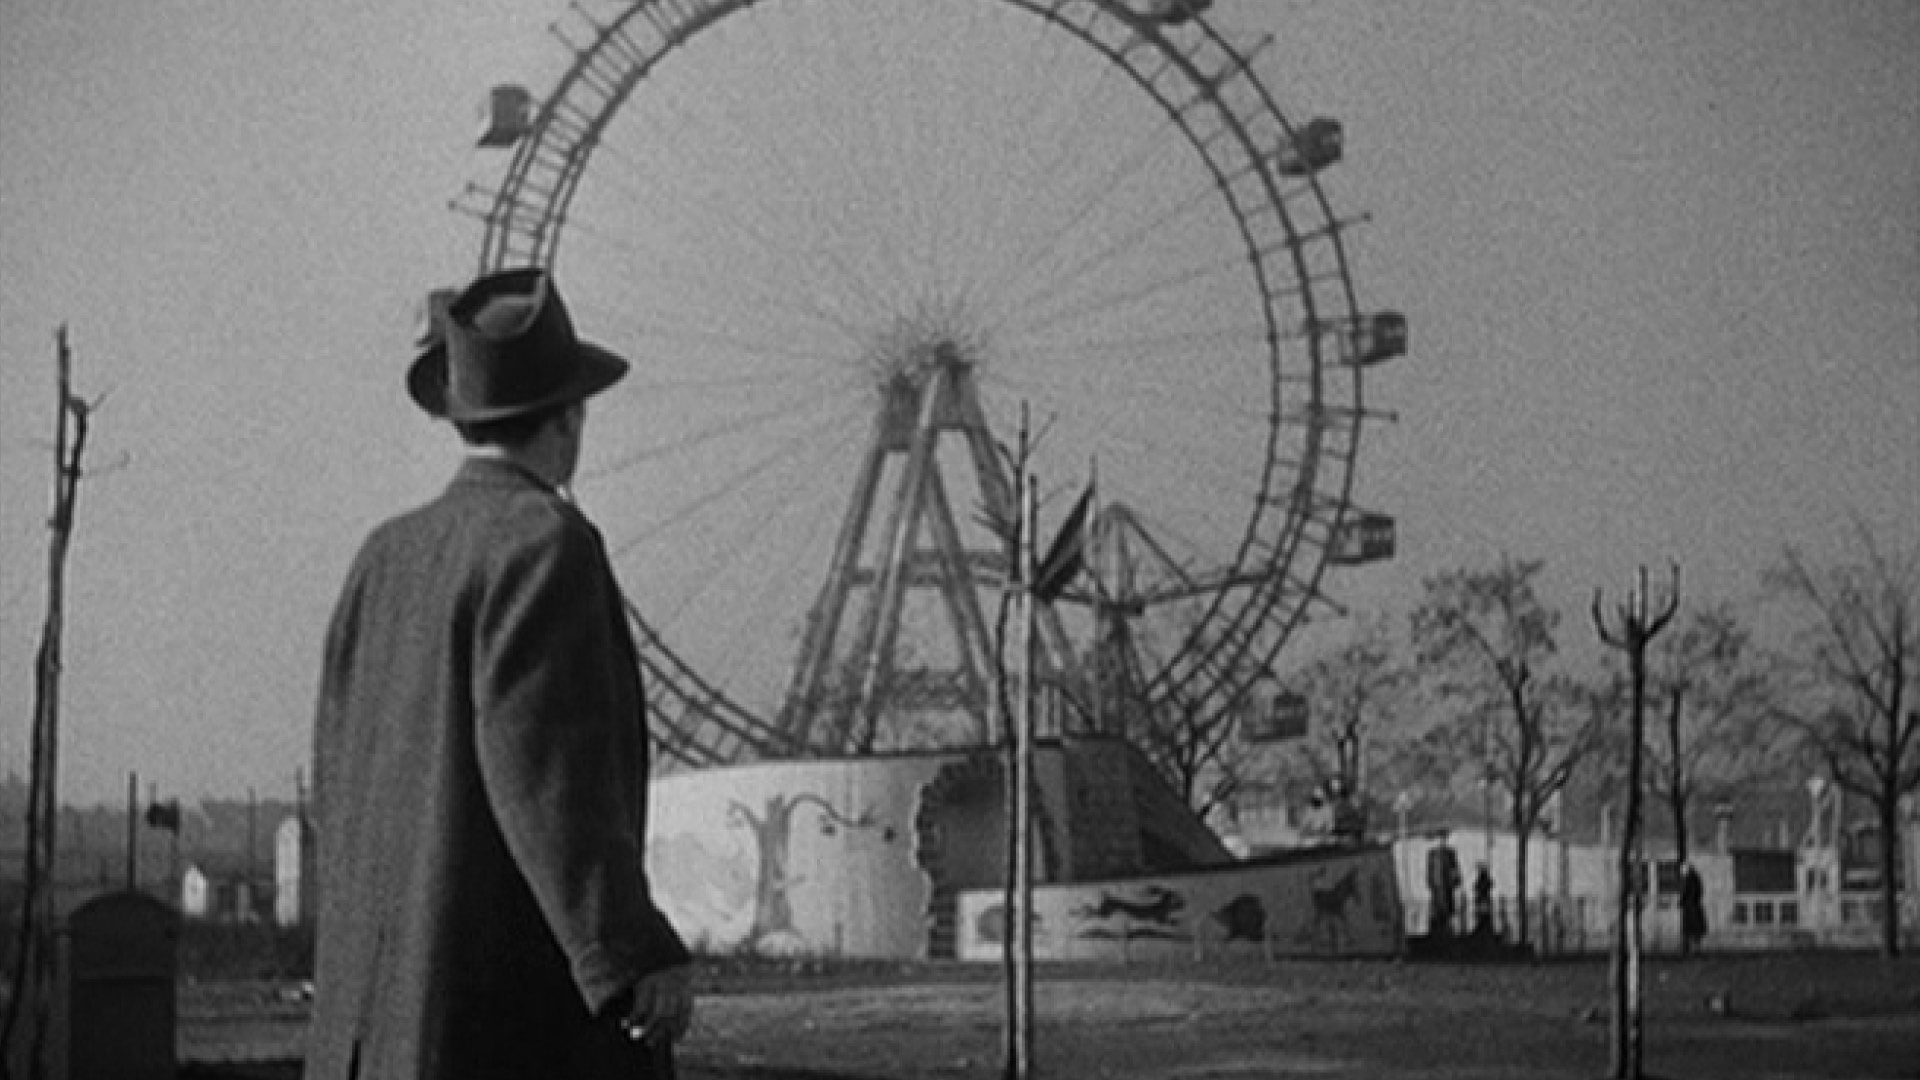 THE THIRD MAN film still of a man standing in front of a ferris wheel